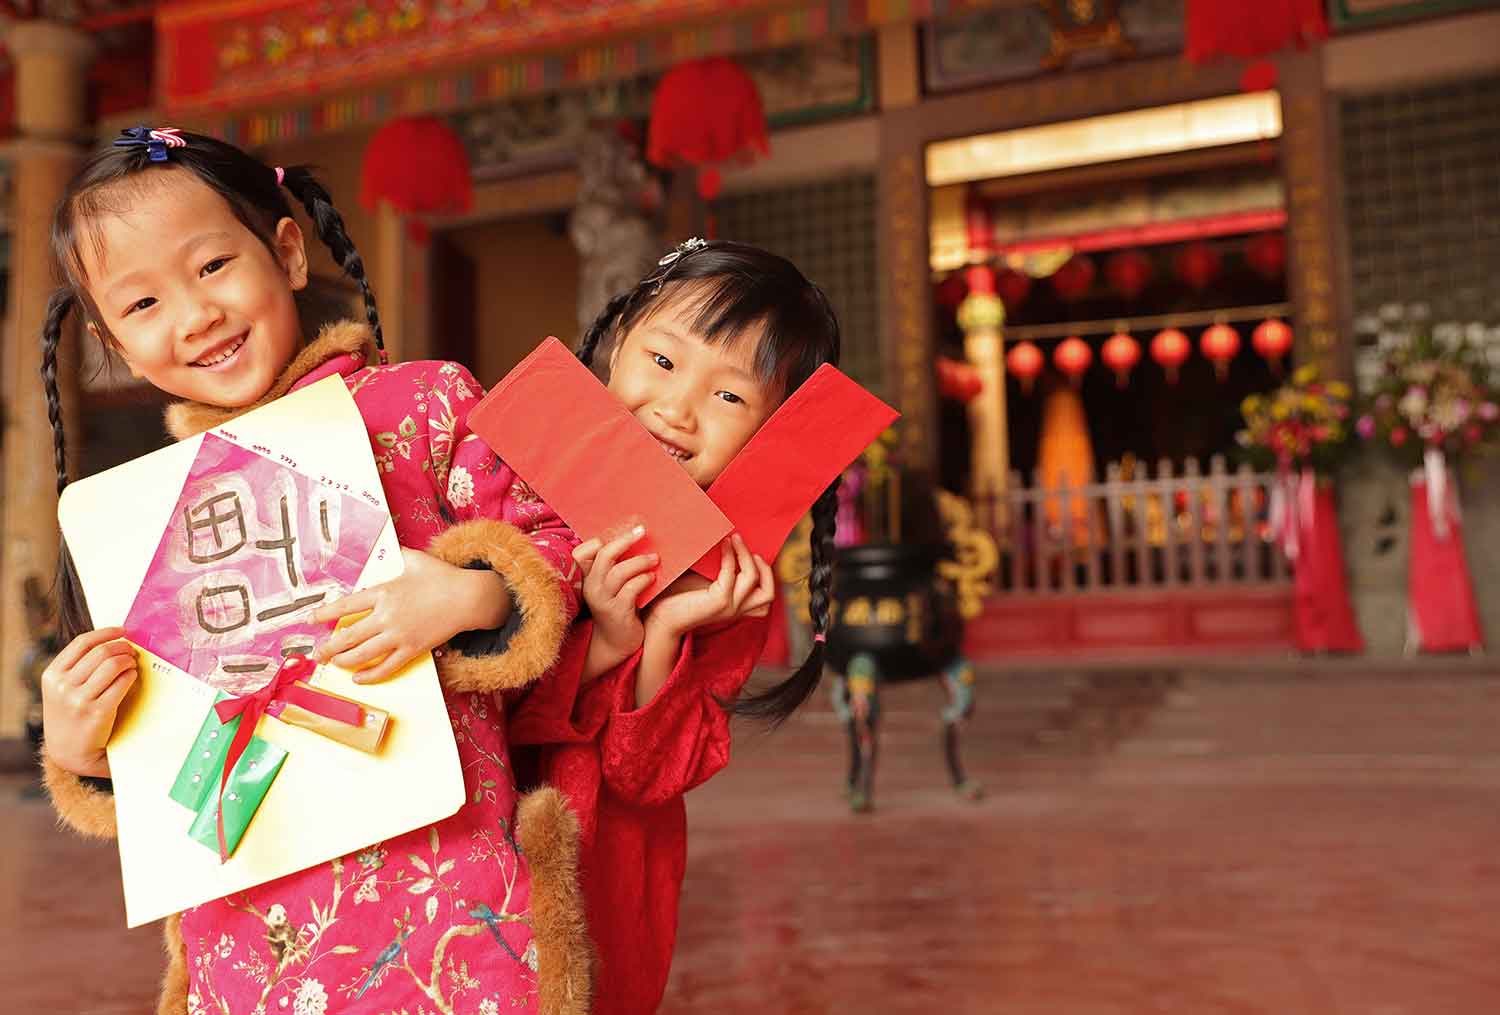 Two smiling girls hold red envelopes and artwork in front of Chinese decorations.